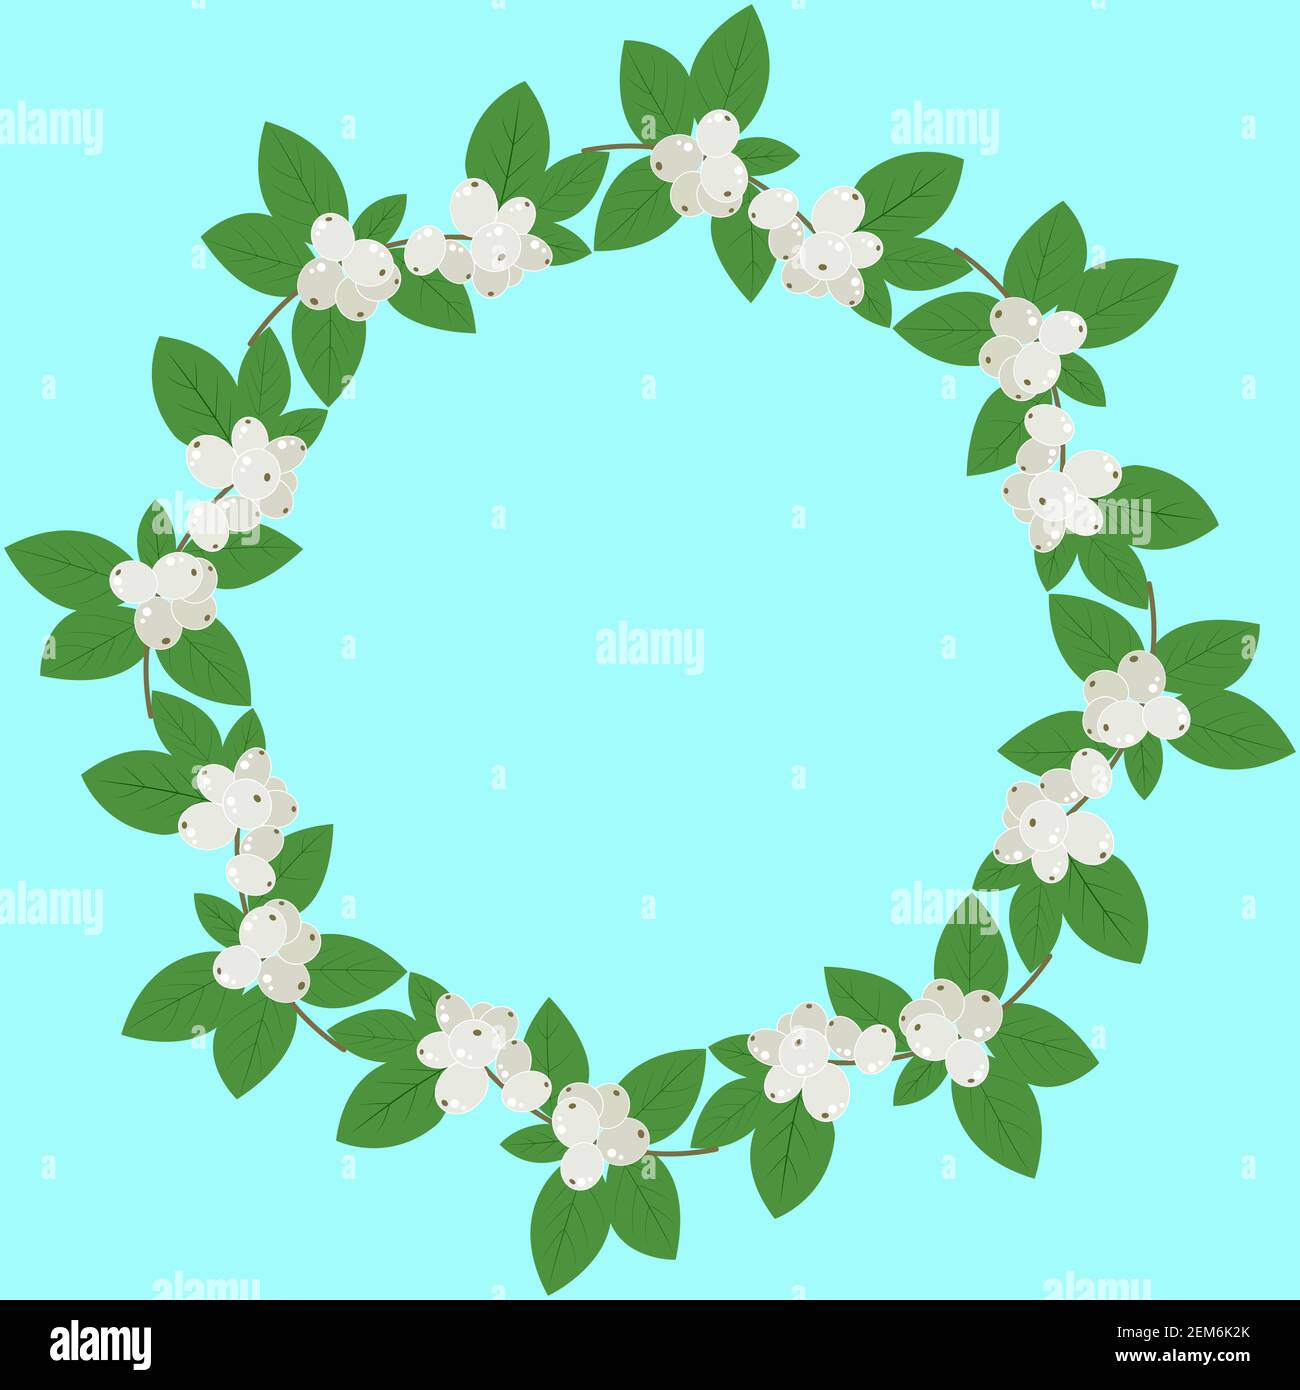 Vector round frame with colorful snowy berries and leaves. Template with place for text. Bright floral pattern. Stock Vector